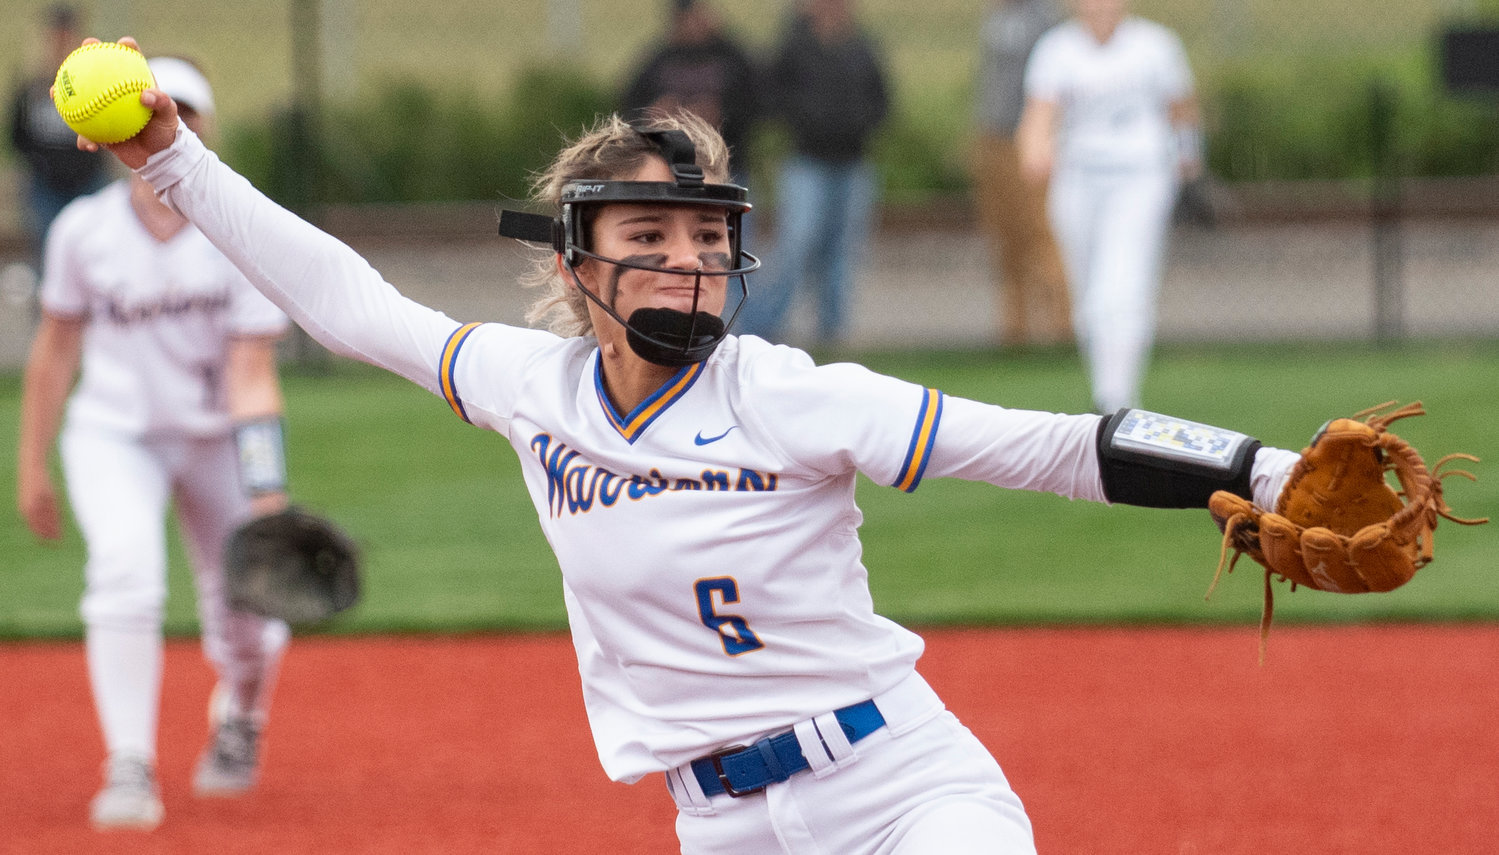 Rochester junior Sadie Knutson winds up to deliver a pitch to Ridgefield in the district semifinals on May 6, 2021.